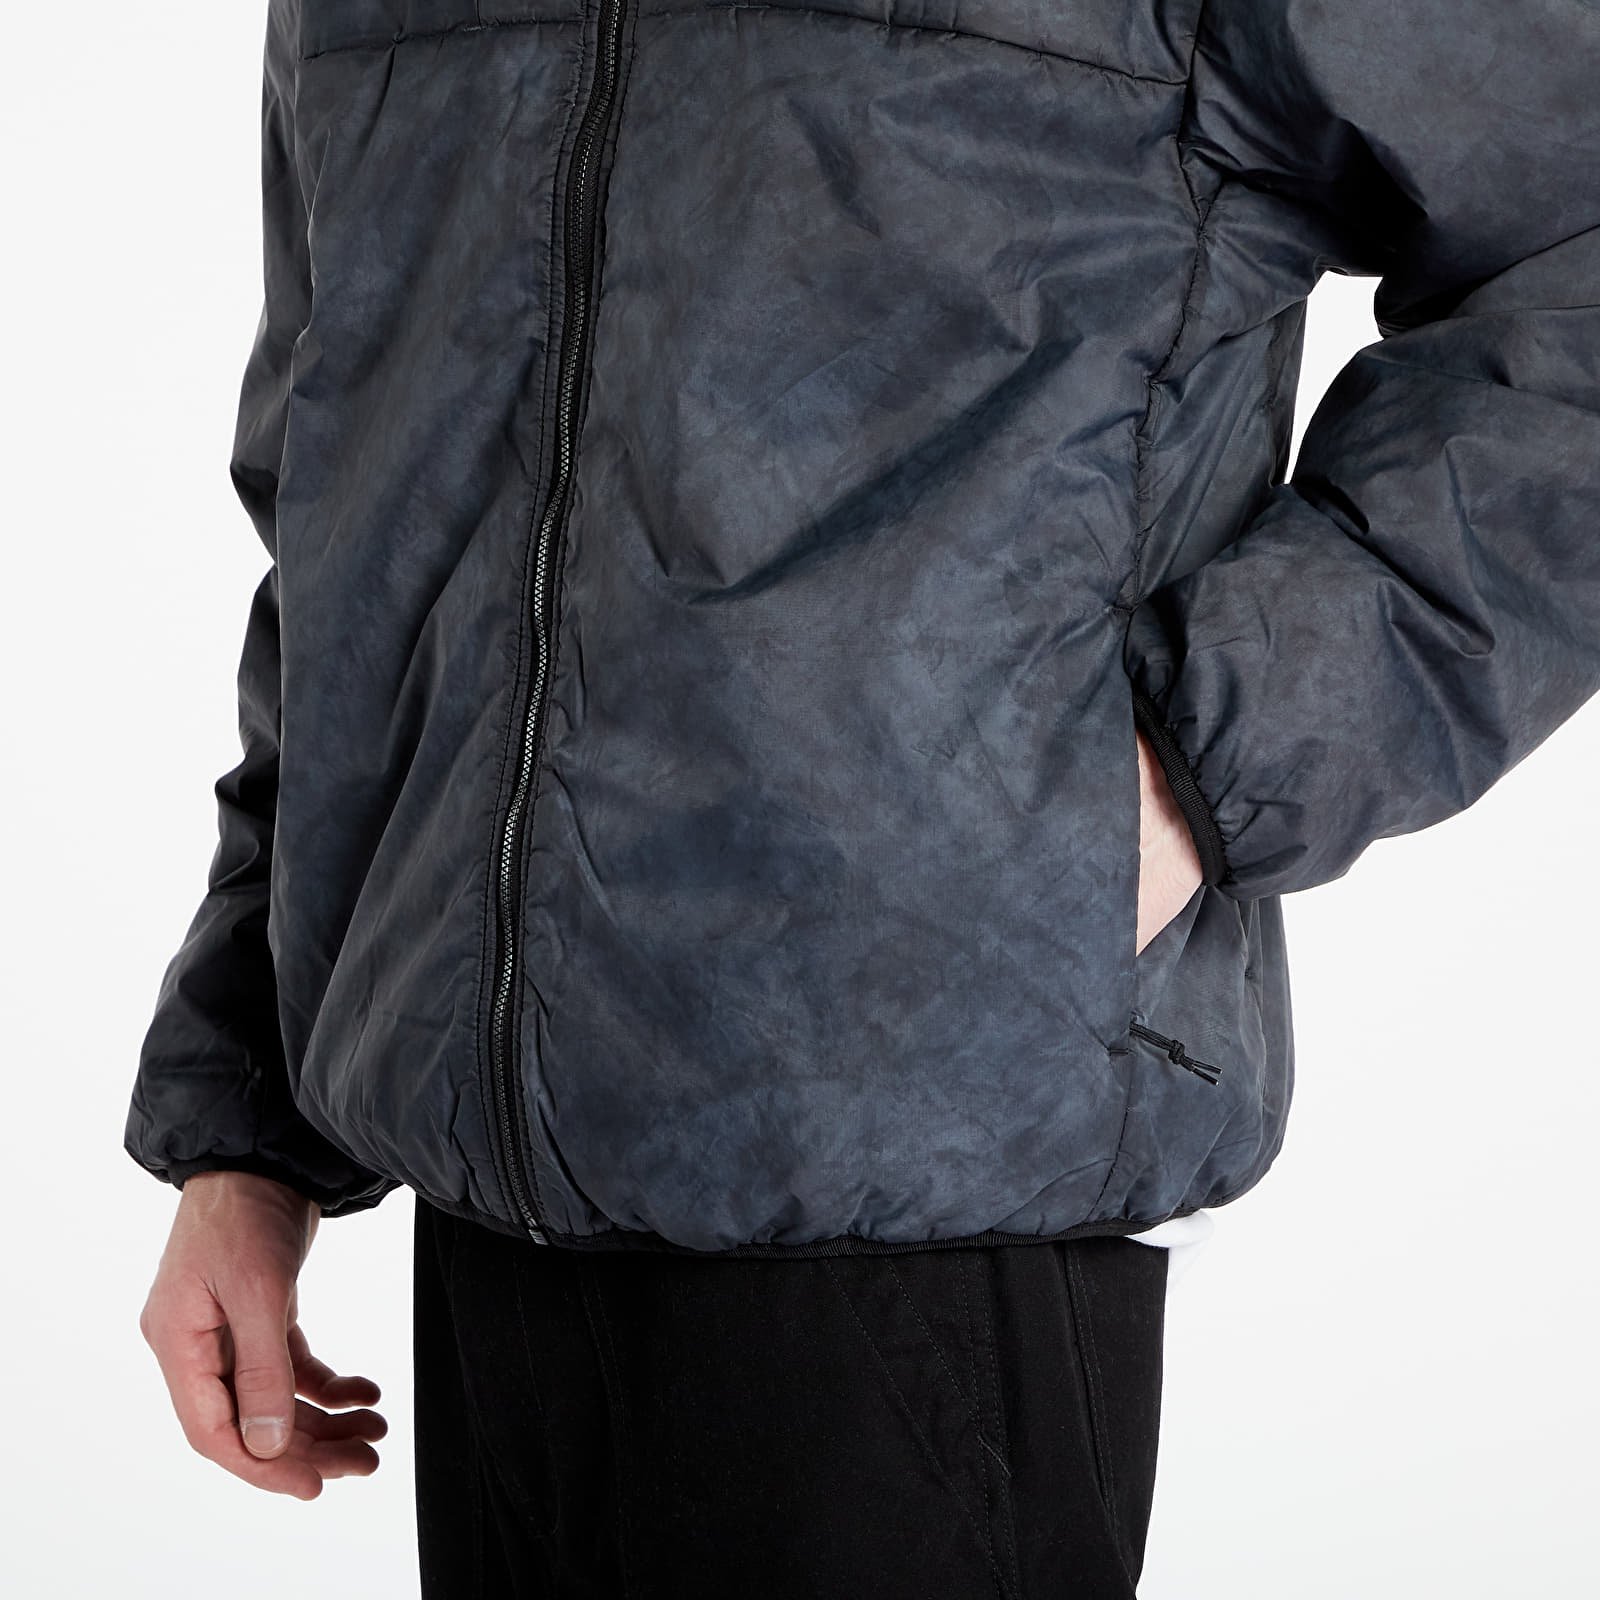 Therma-FIT ADV "Rope De Dope" Packable Insulated Jacket